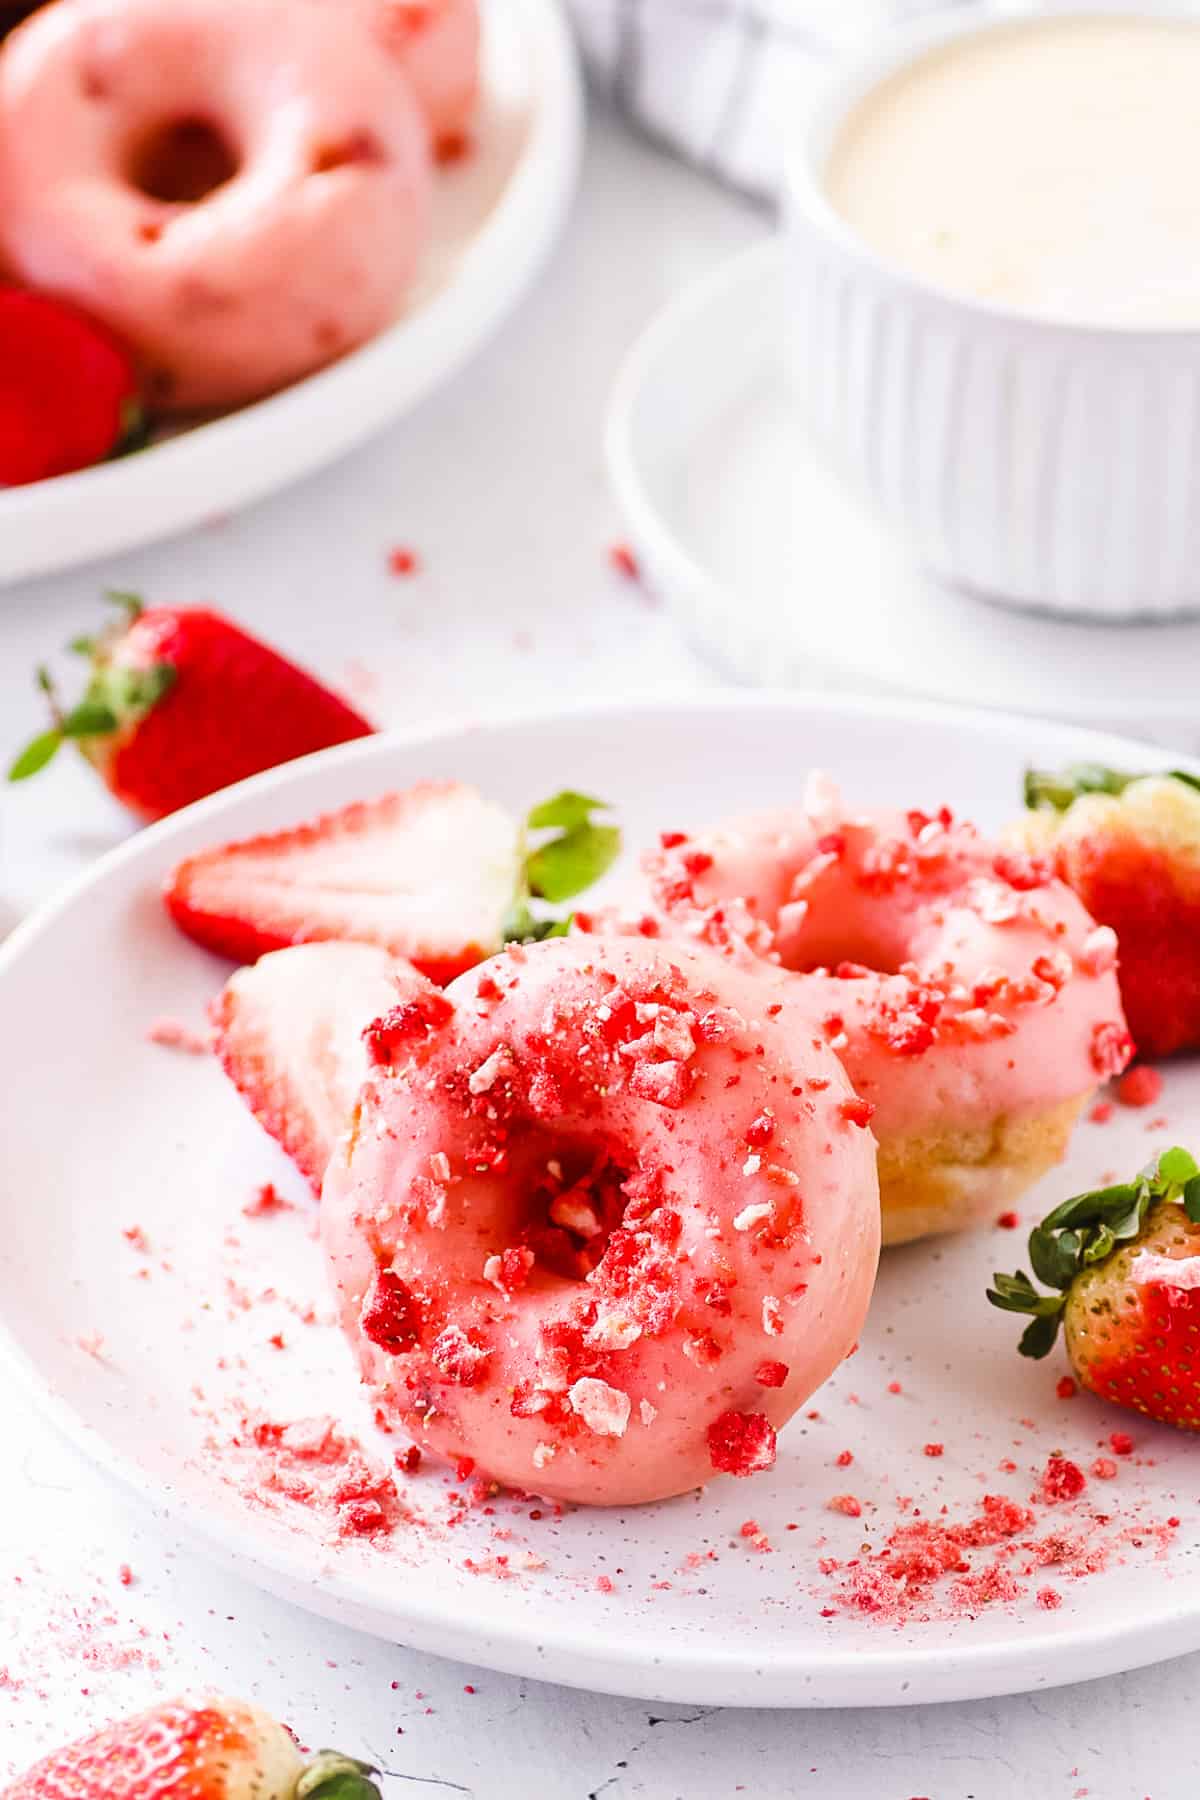 Baked strawberry donuts on a white plate surrounded by fresh strawberry slices.